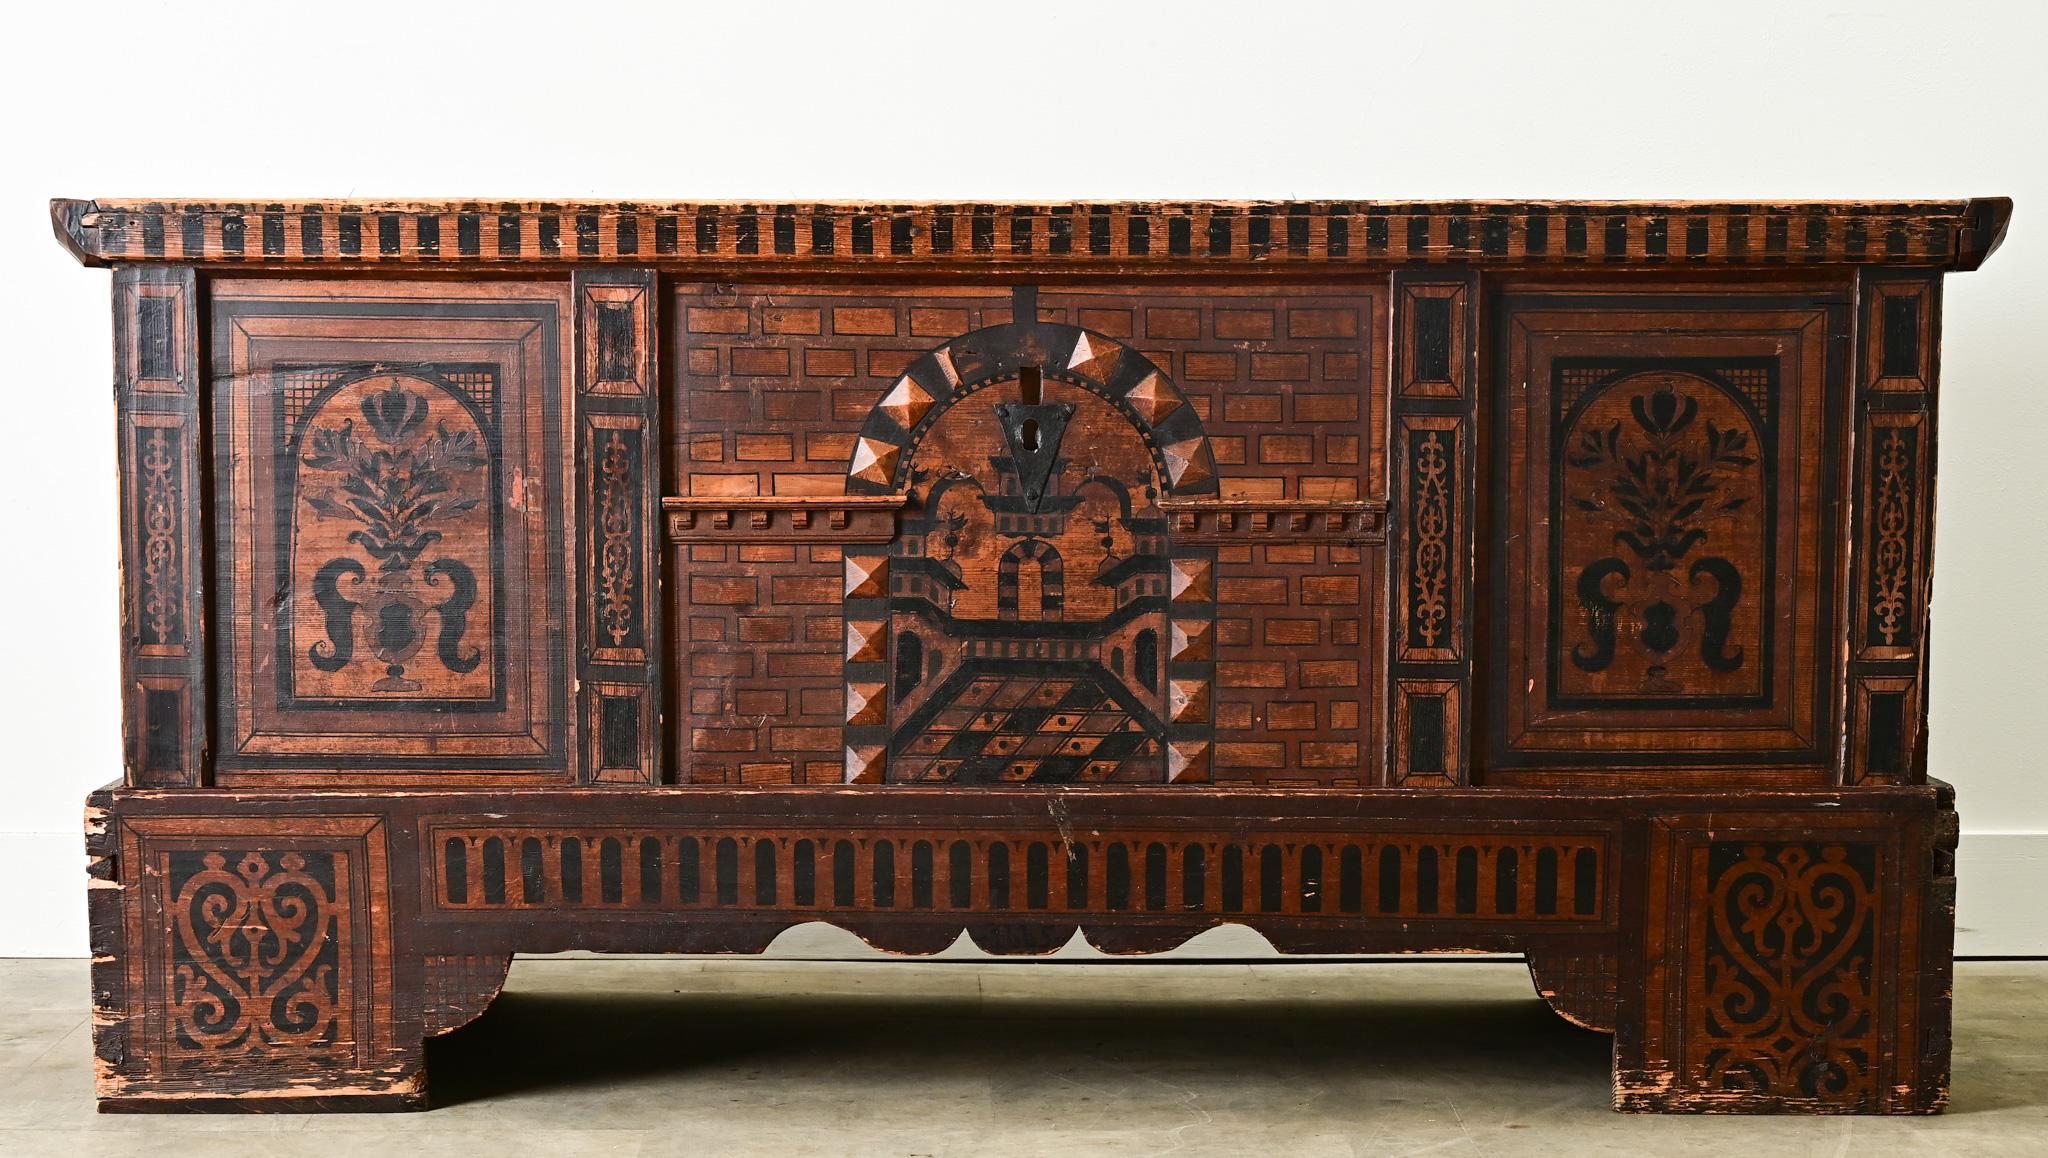 A unique large  pine trunk from Holland with its original paint finish. The front side has a painted design of a castle with a faux brick pattern and stylized windows over a playful scalloped apron, flanked by floral geometric patterns. The top